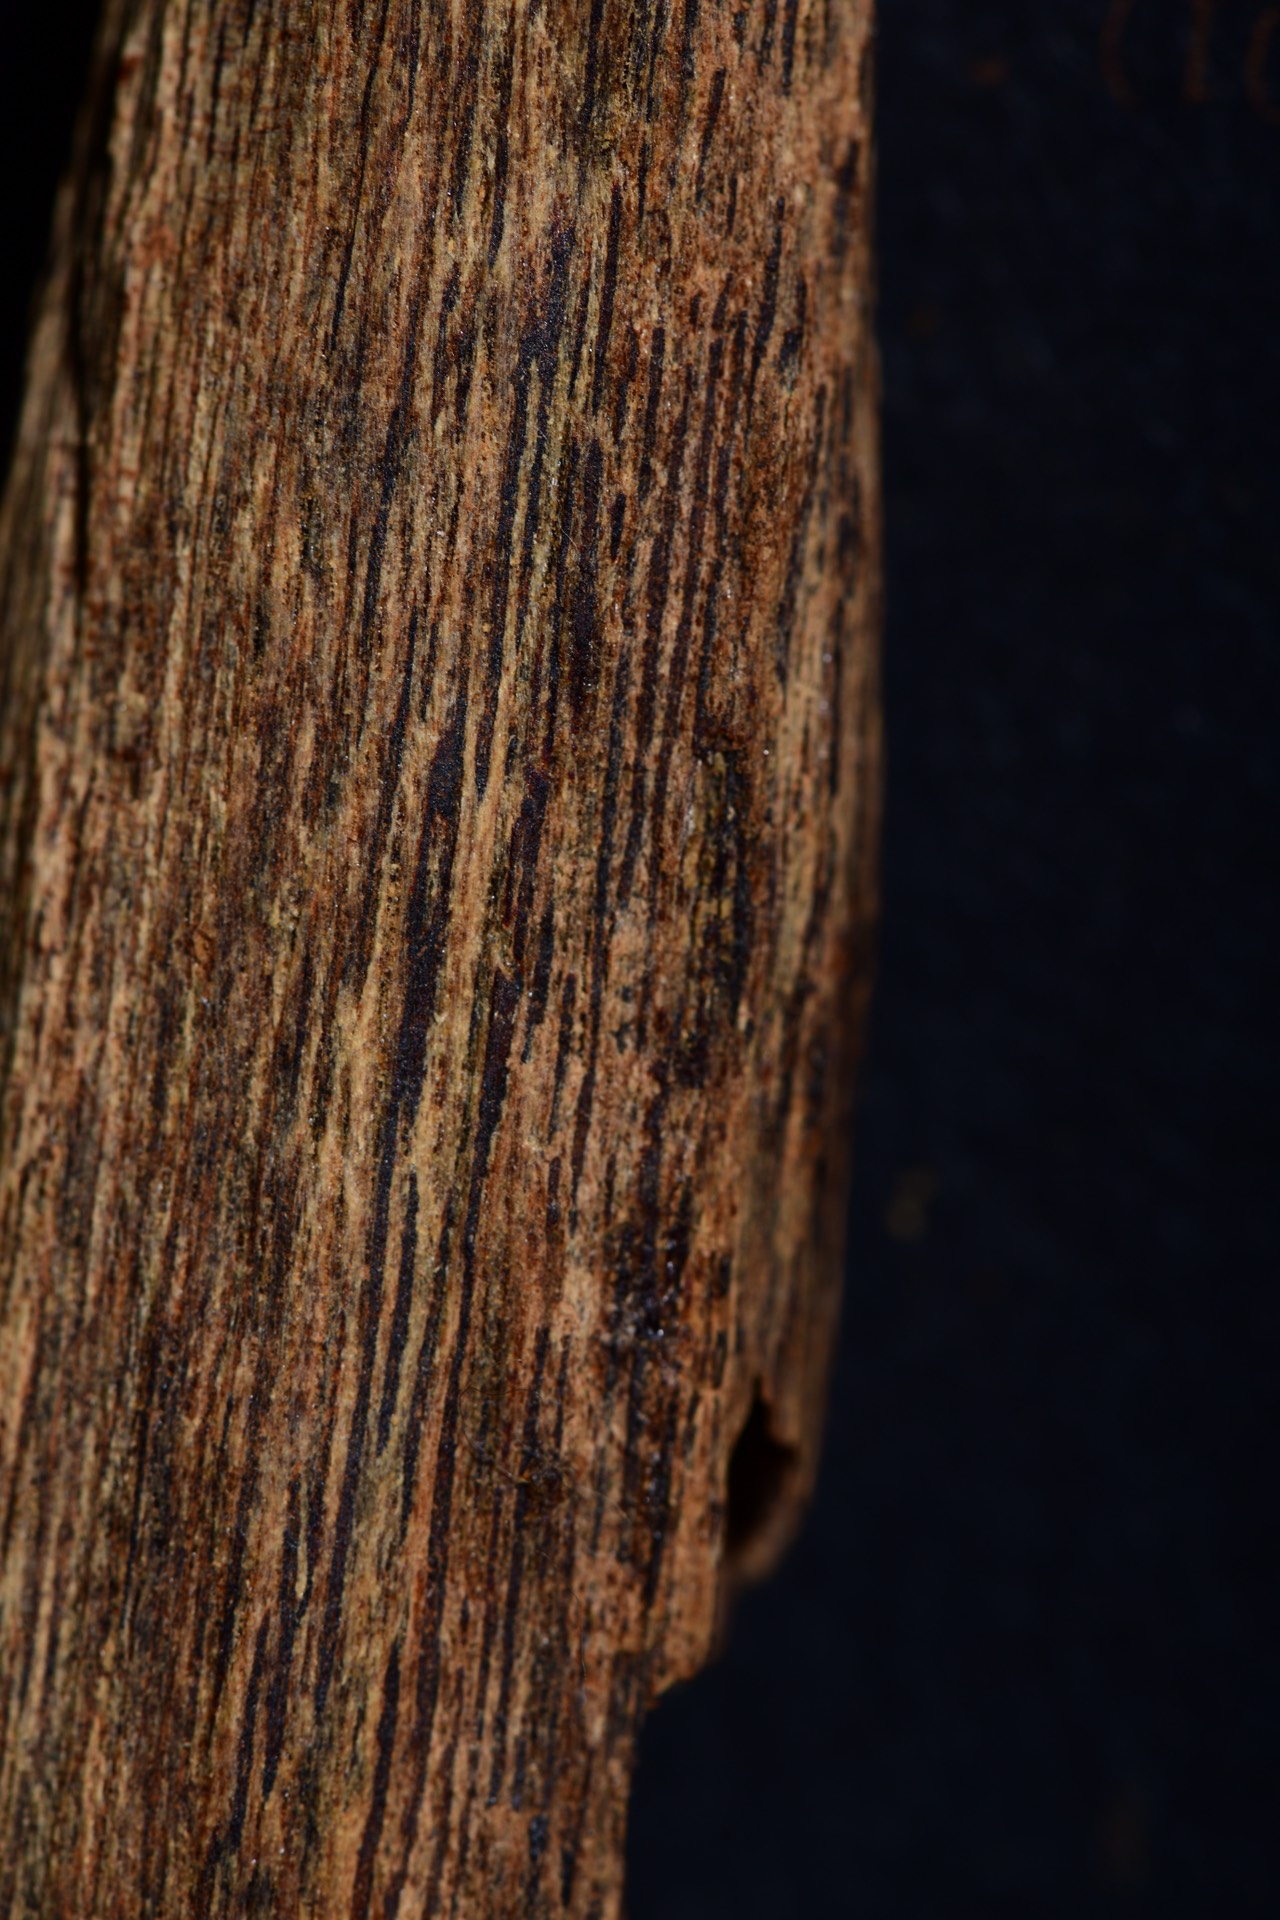 Red earth agarwood - Image 5 of 9